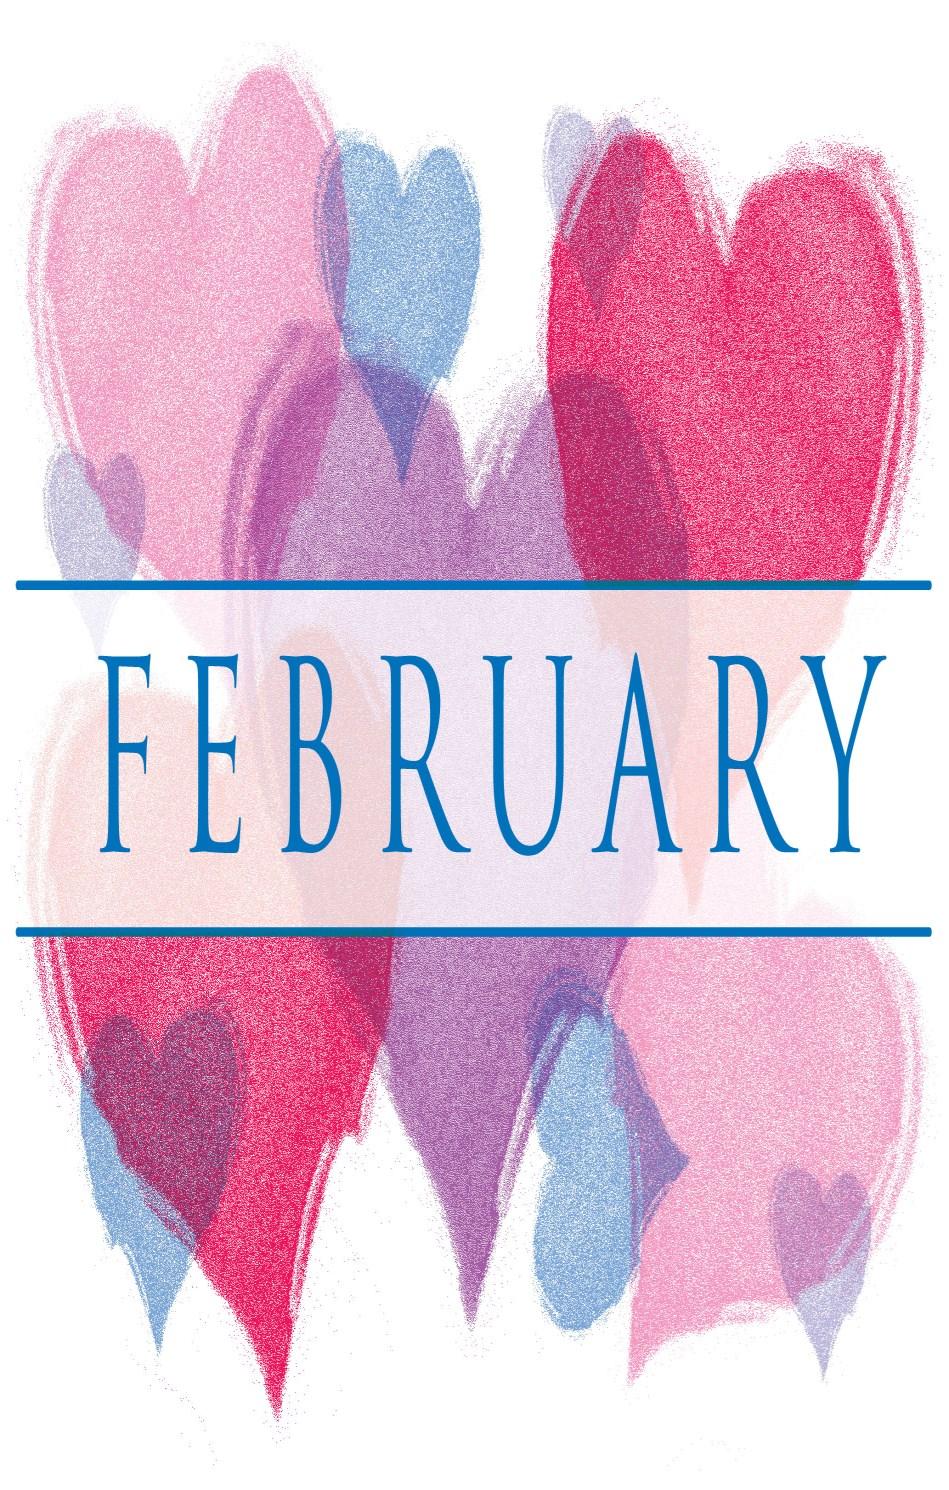 FEBRUARY 2015 FIRST LUTHERAN CHURCH PAGE 4 PAGE 9 FIRST LUTHERAN CHURCH FEBRUARY 2015 Pastoral Acts Baptisms: January 4 Weddings: Funerals: January 3 January 20 Theodore Roger Hambrick Richard A.